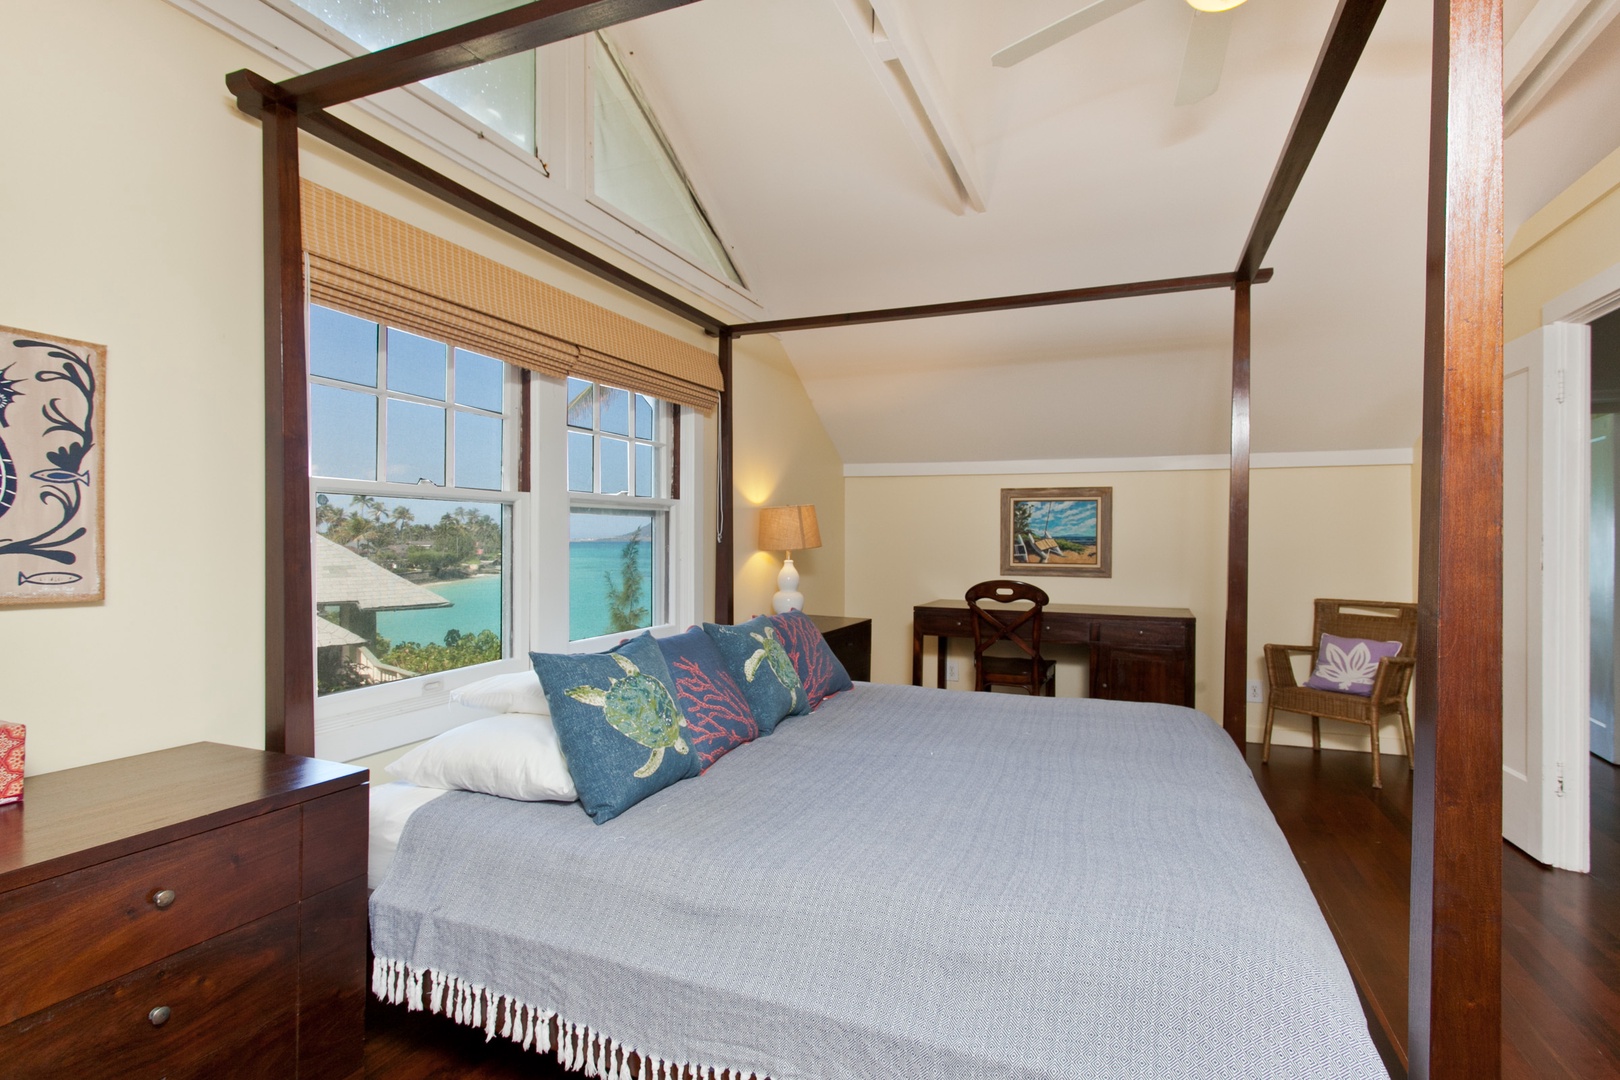 Kailua Vacation Rentals, Lanikai Village* - Hale Mahina Lanikai: Wake up to breathtaking views in our primary bedroom with four-poster king bed.